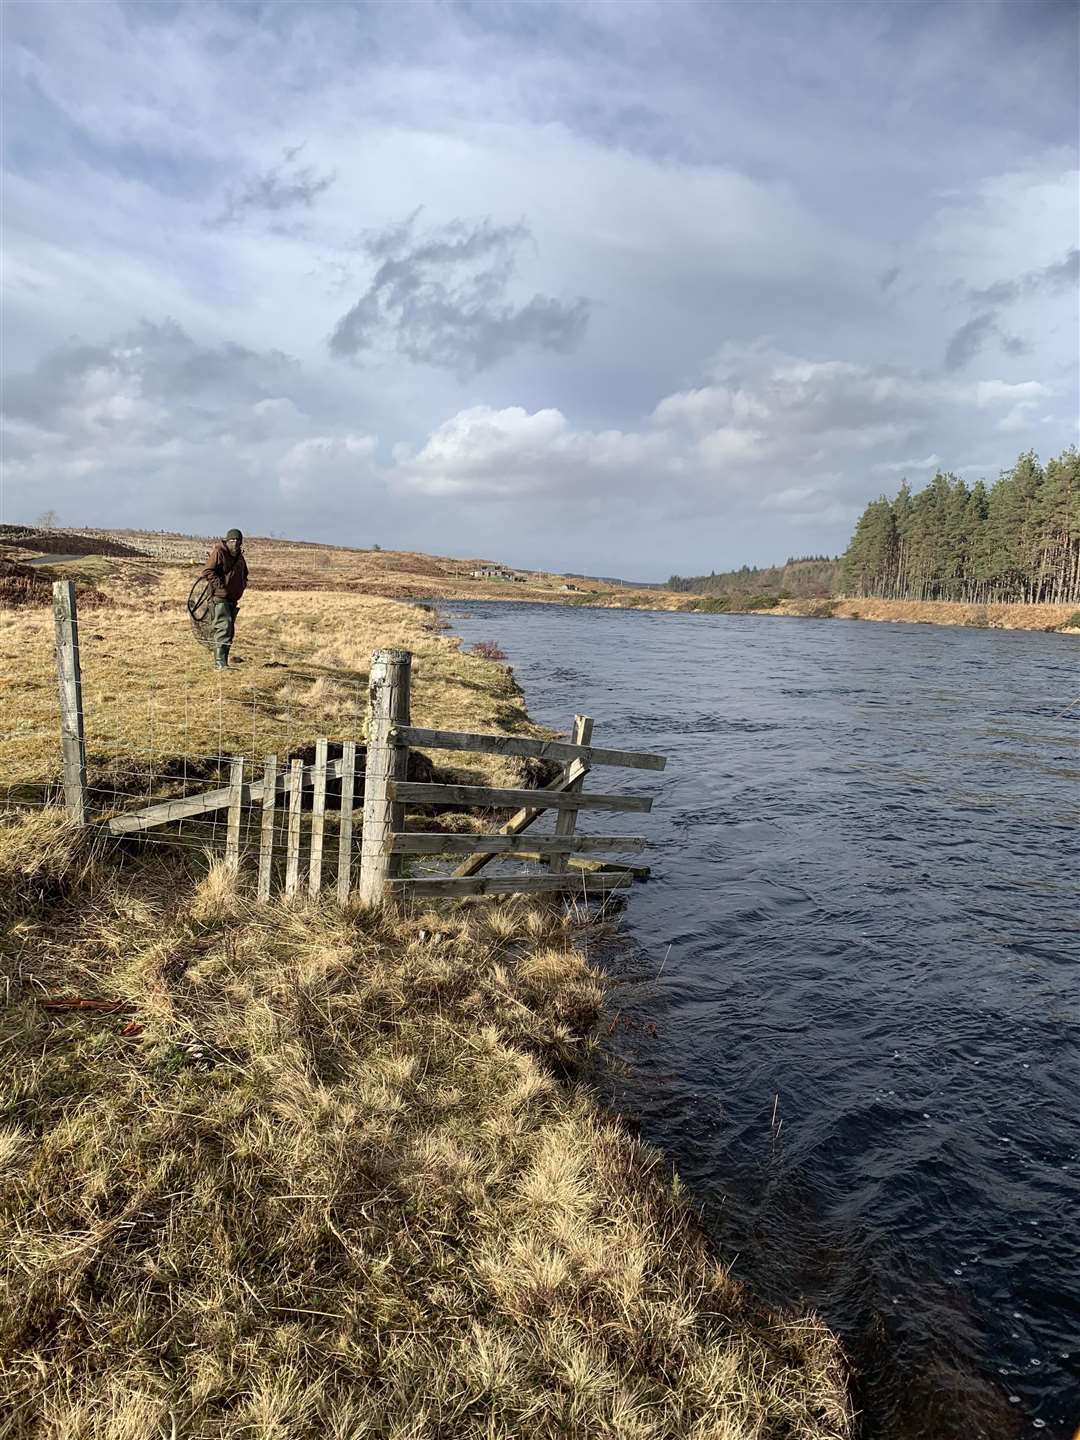 The River Naver flows 18 miles from Loch Naver to the sea at Bettyhill.